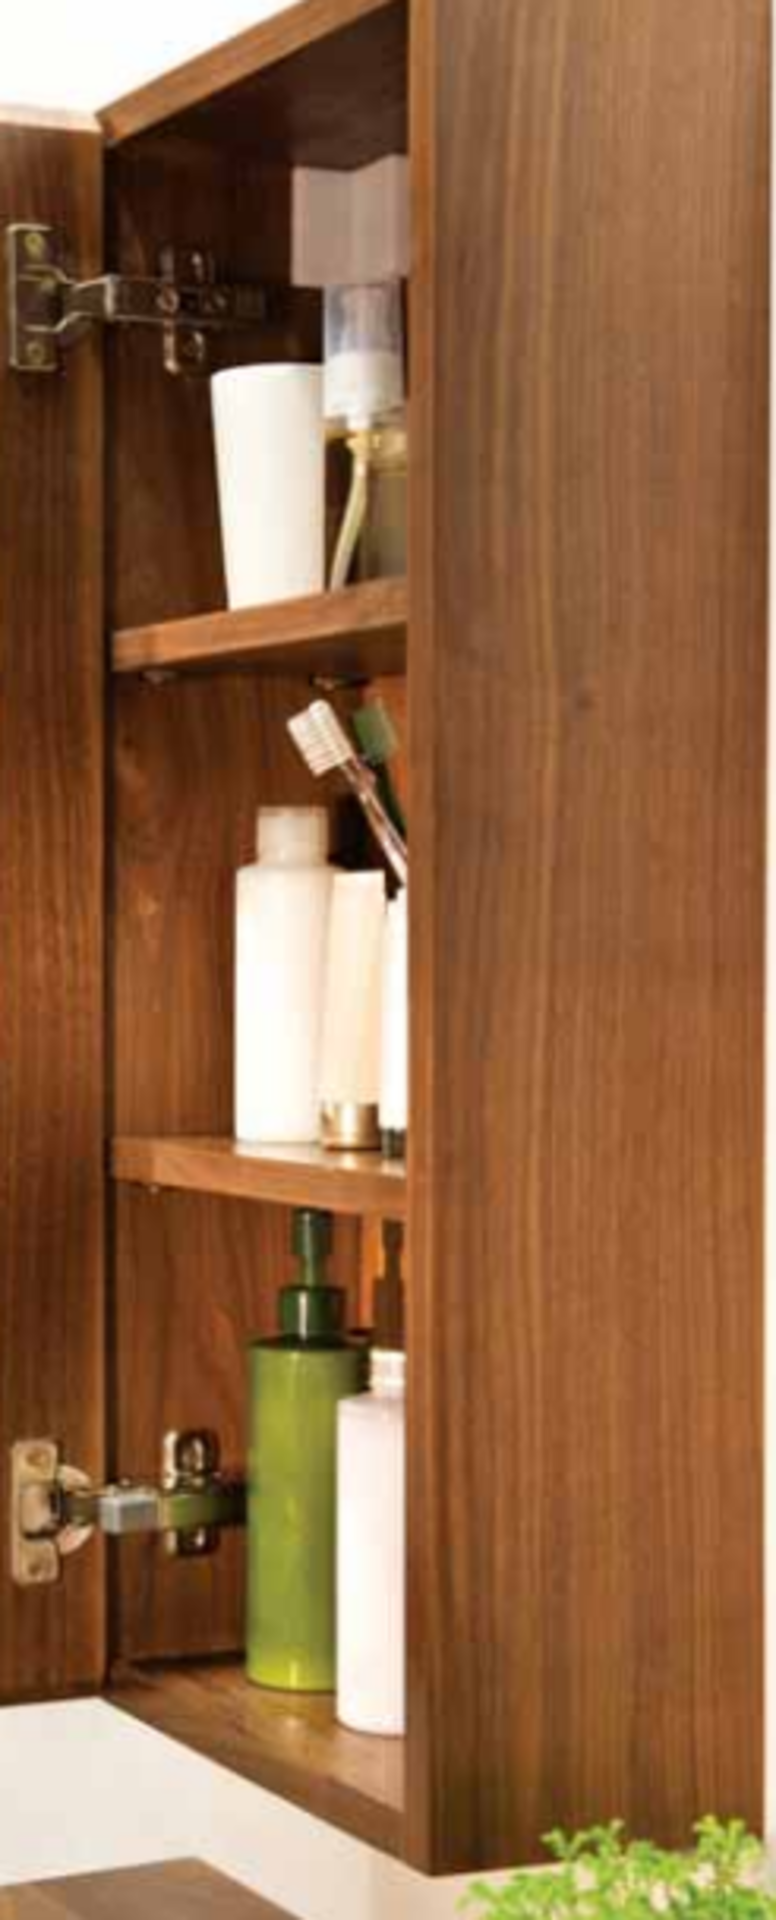 1 x Stonearth 300mm Wall Mounted Bathroom Storage Cabinet - American Solid Walnut - RRP £300 - Image 4 of 11